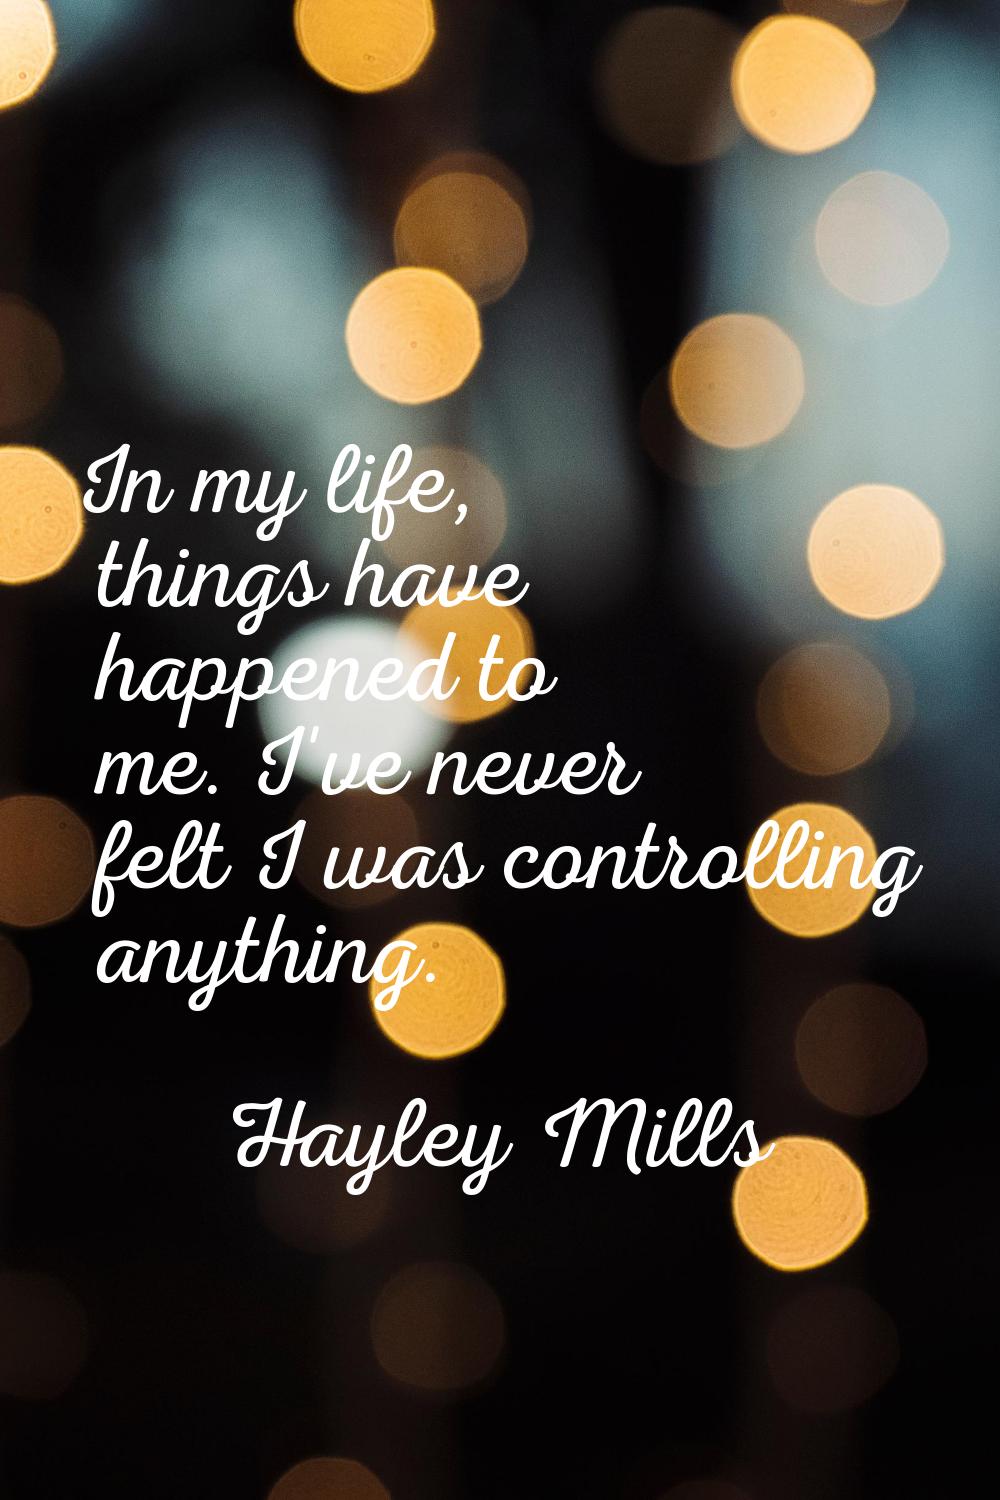 In my life, things have happened to me. I've never felt I was controlling anything.